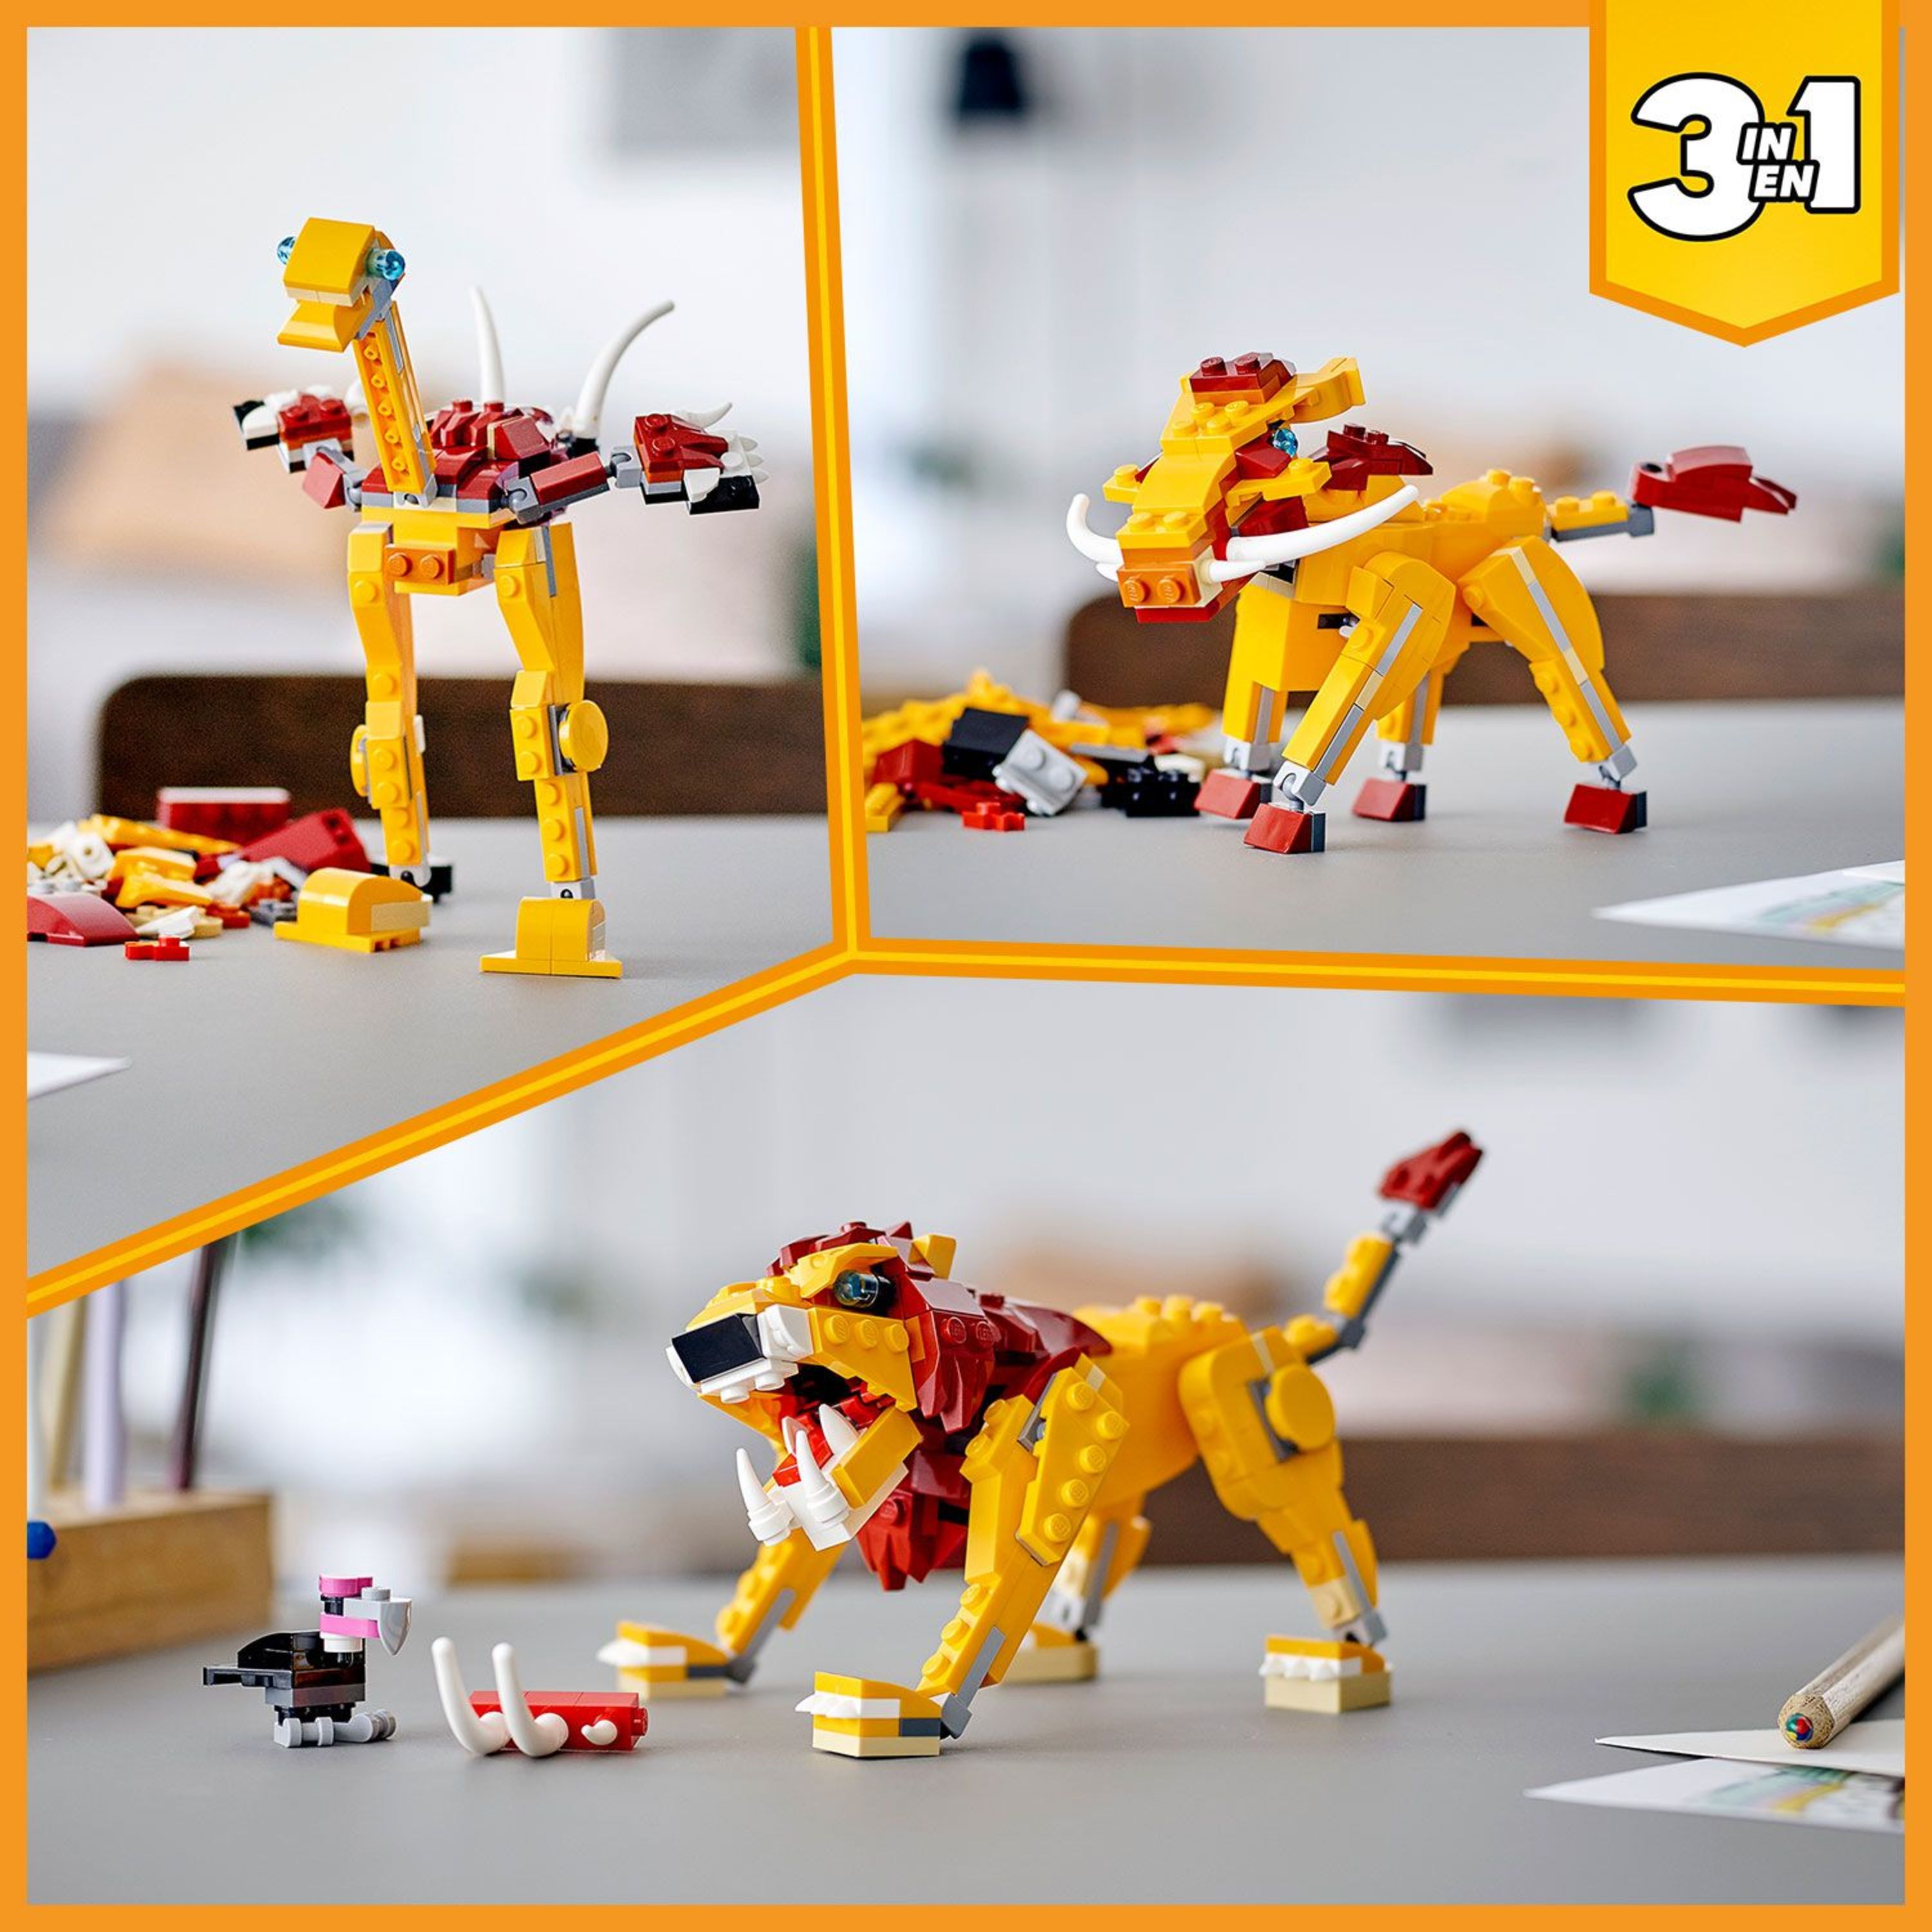 LEGO Creator 3in1 Wild Lion 31112 Building Toy Set (224 Pieces) - image 3 of 7